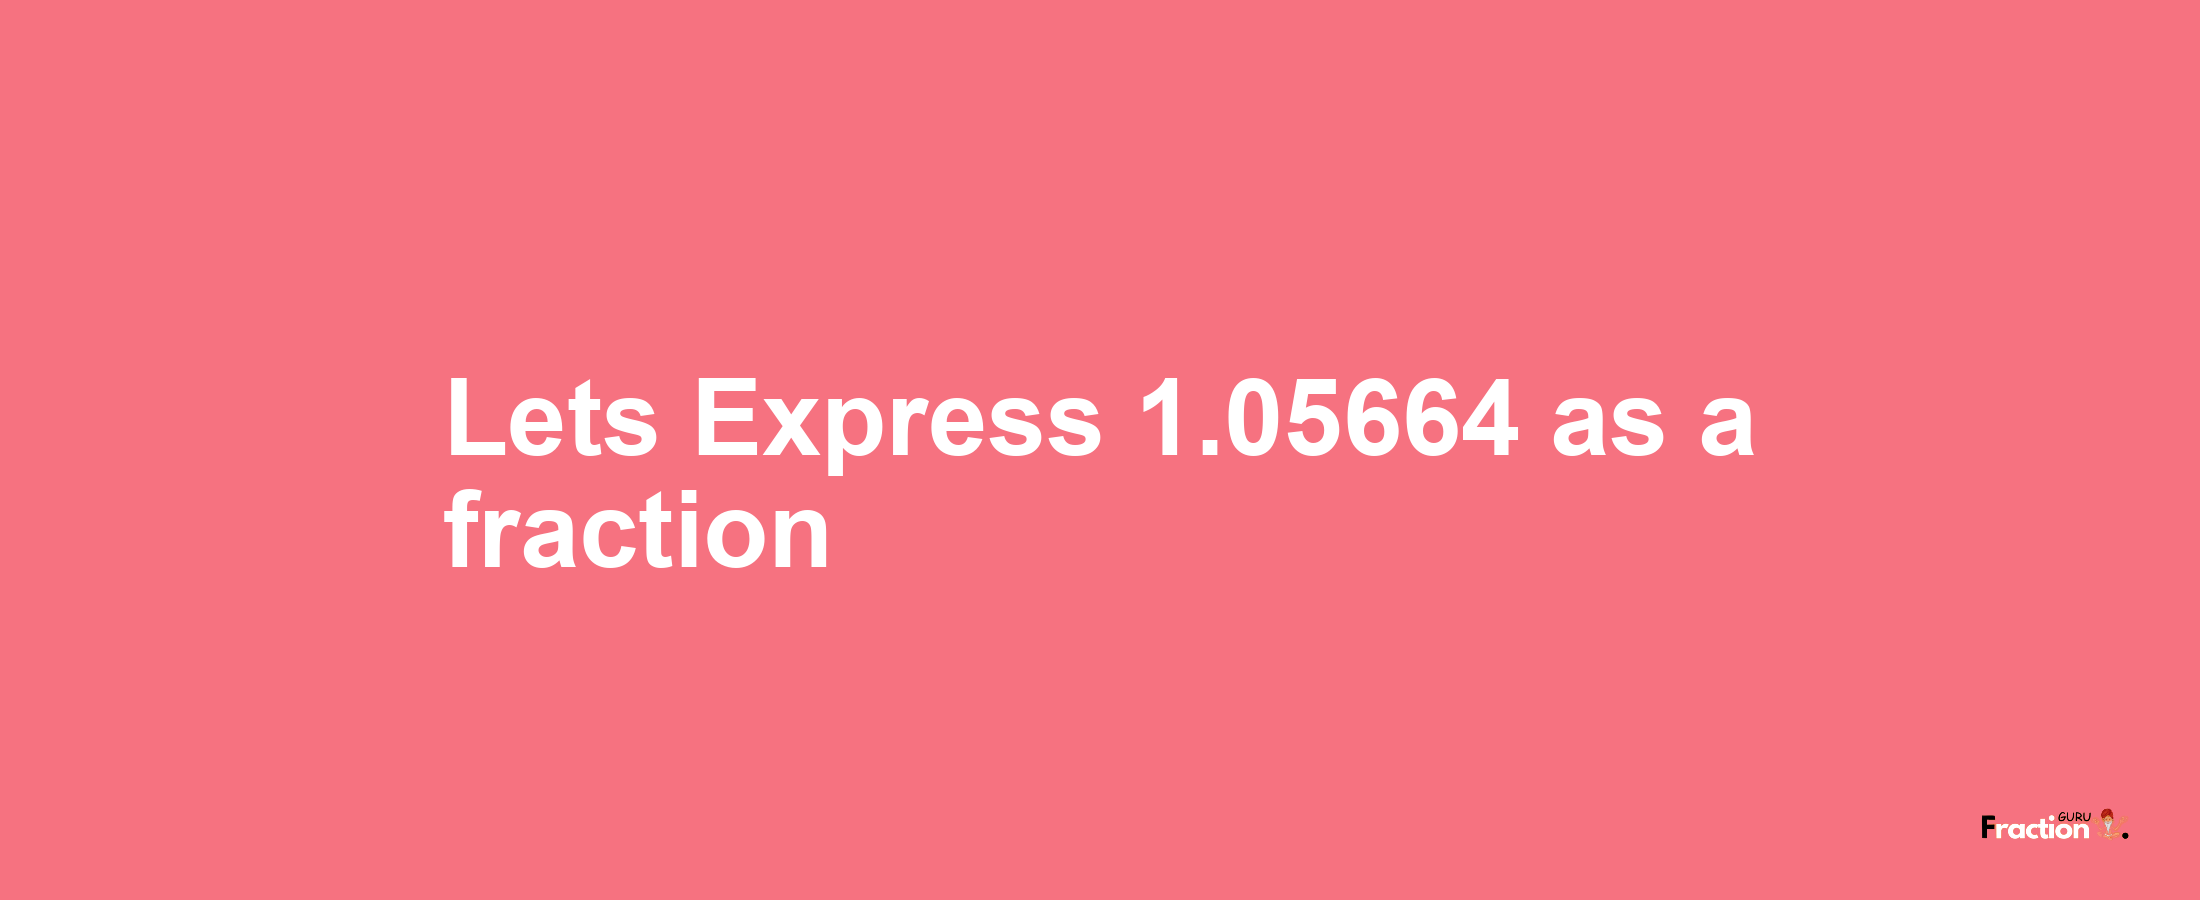 Lets Express 1.05664 as afraction